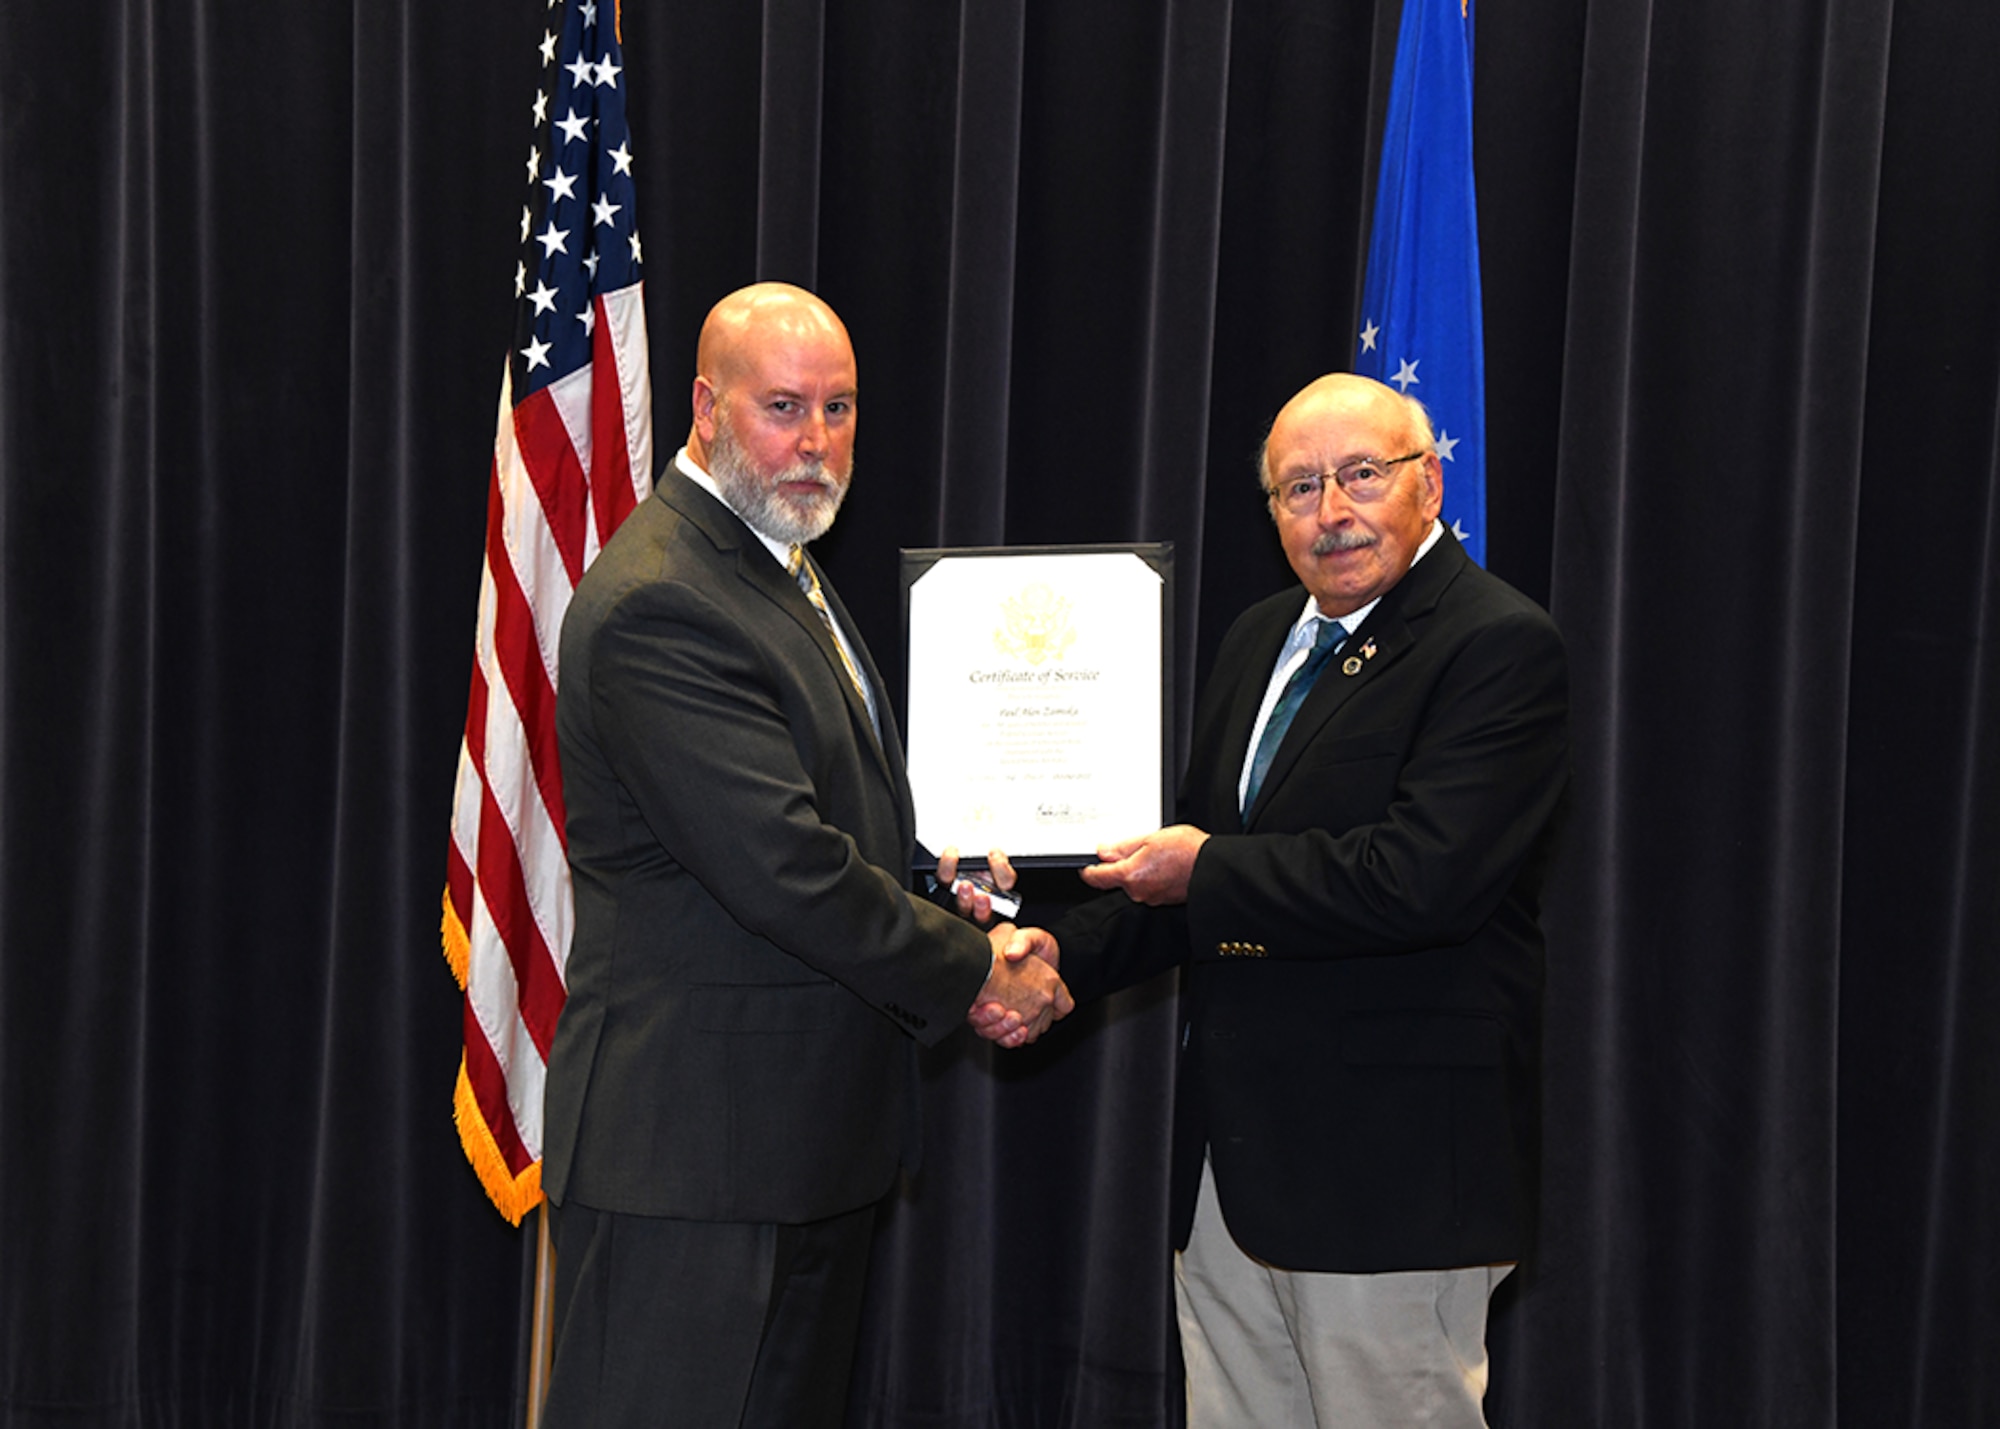 Marty Fagan presents Paul Alan Zamiska with a certificate of service during a retirement ceremony in the 557th Weather Wing’s Chief Master Sgt. Peter Morris auditorium on Offutt Air Force Base, Nebraska Sept. 30.